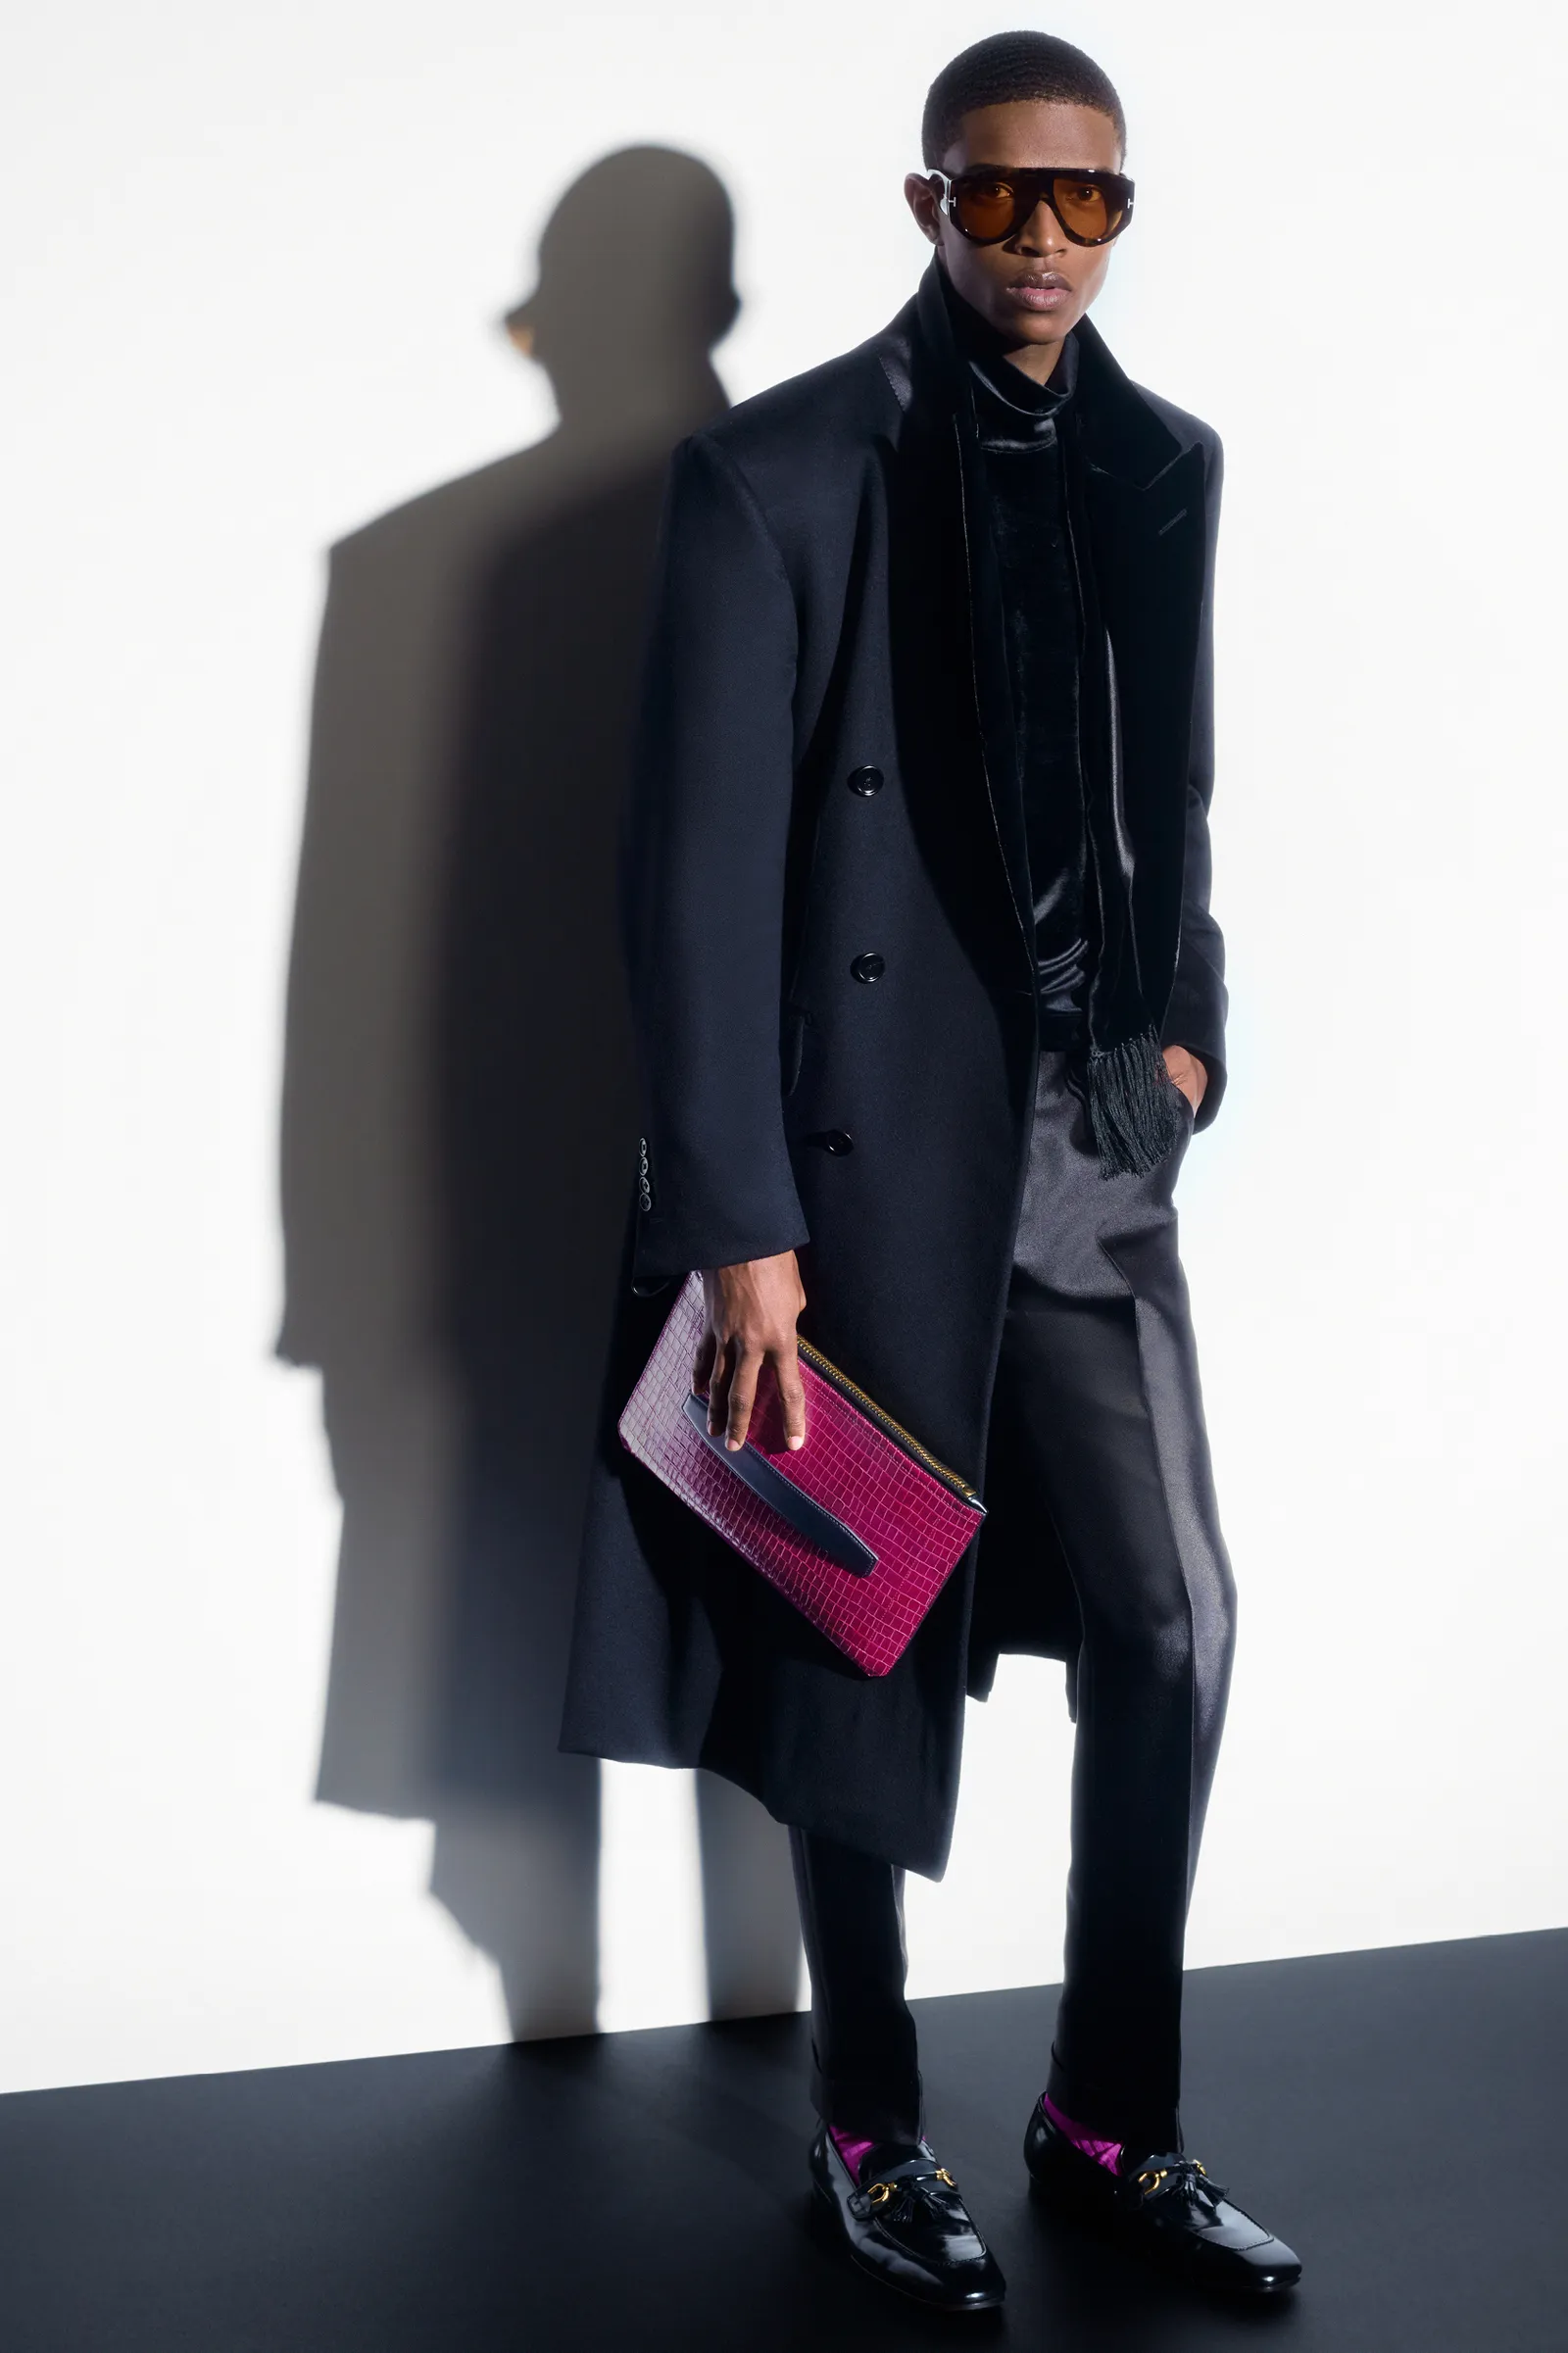 00042-tom-ford-fall-22-mens-nyc-credit-brand.png